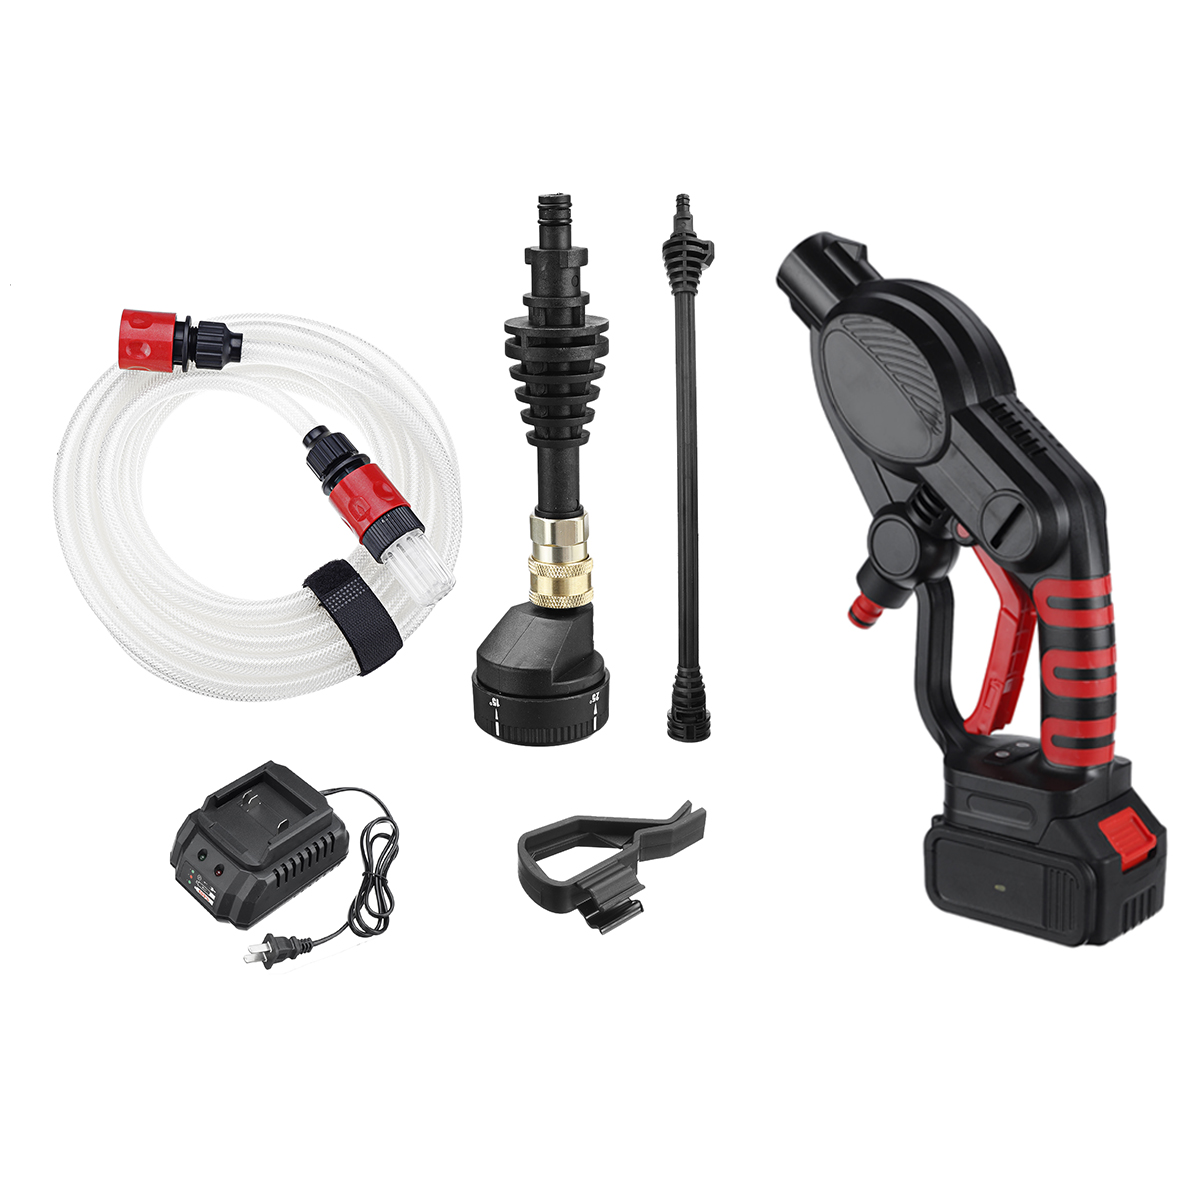 21V-Multifunctional-Cordless-Pressure-Cleaner-Washer-Sprayer-Water-Hose-Nozzle-Pump-with-Battery-1292573-8